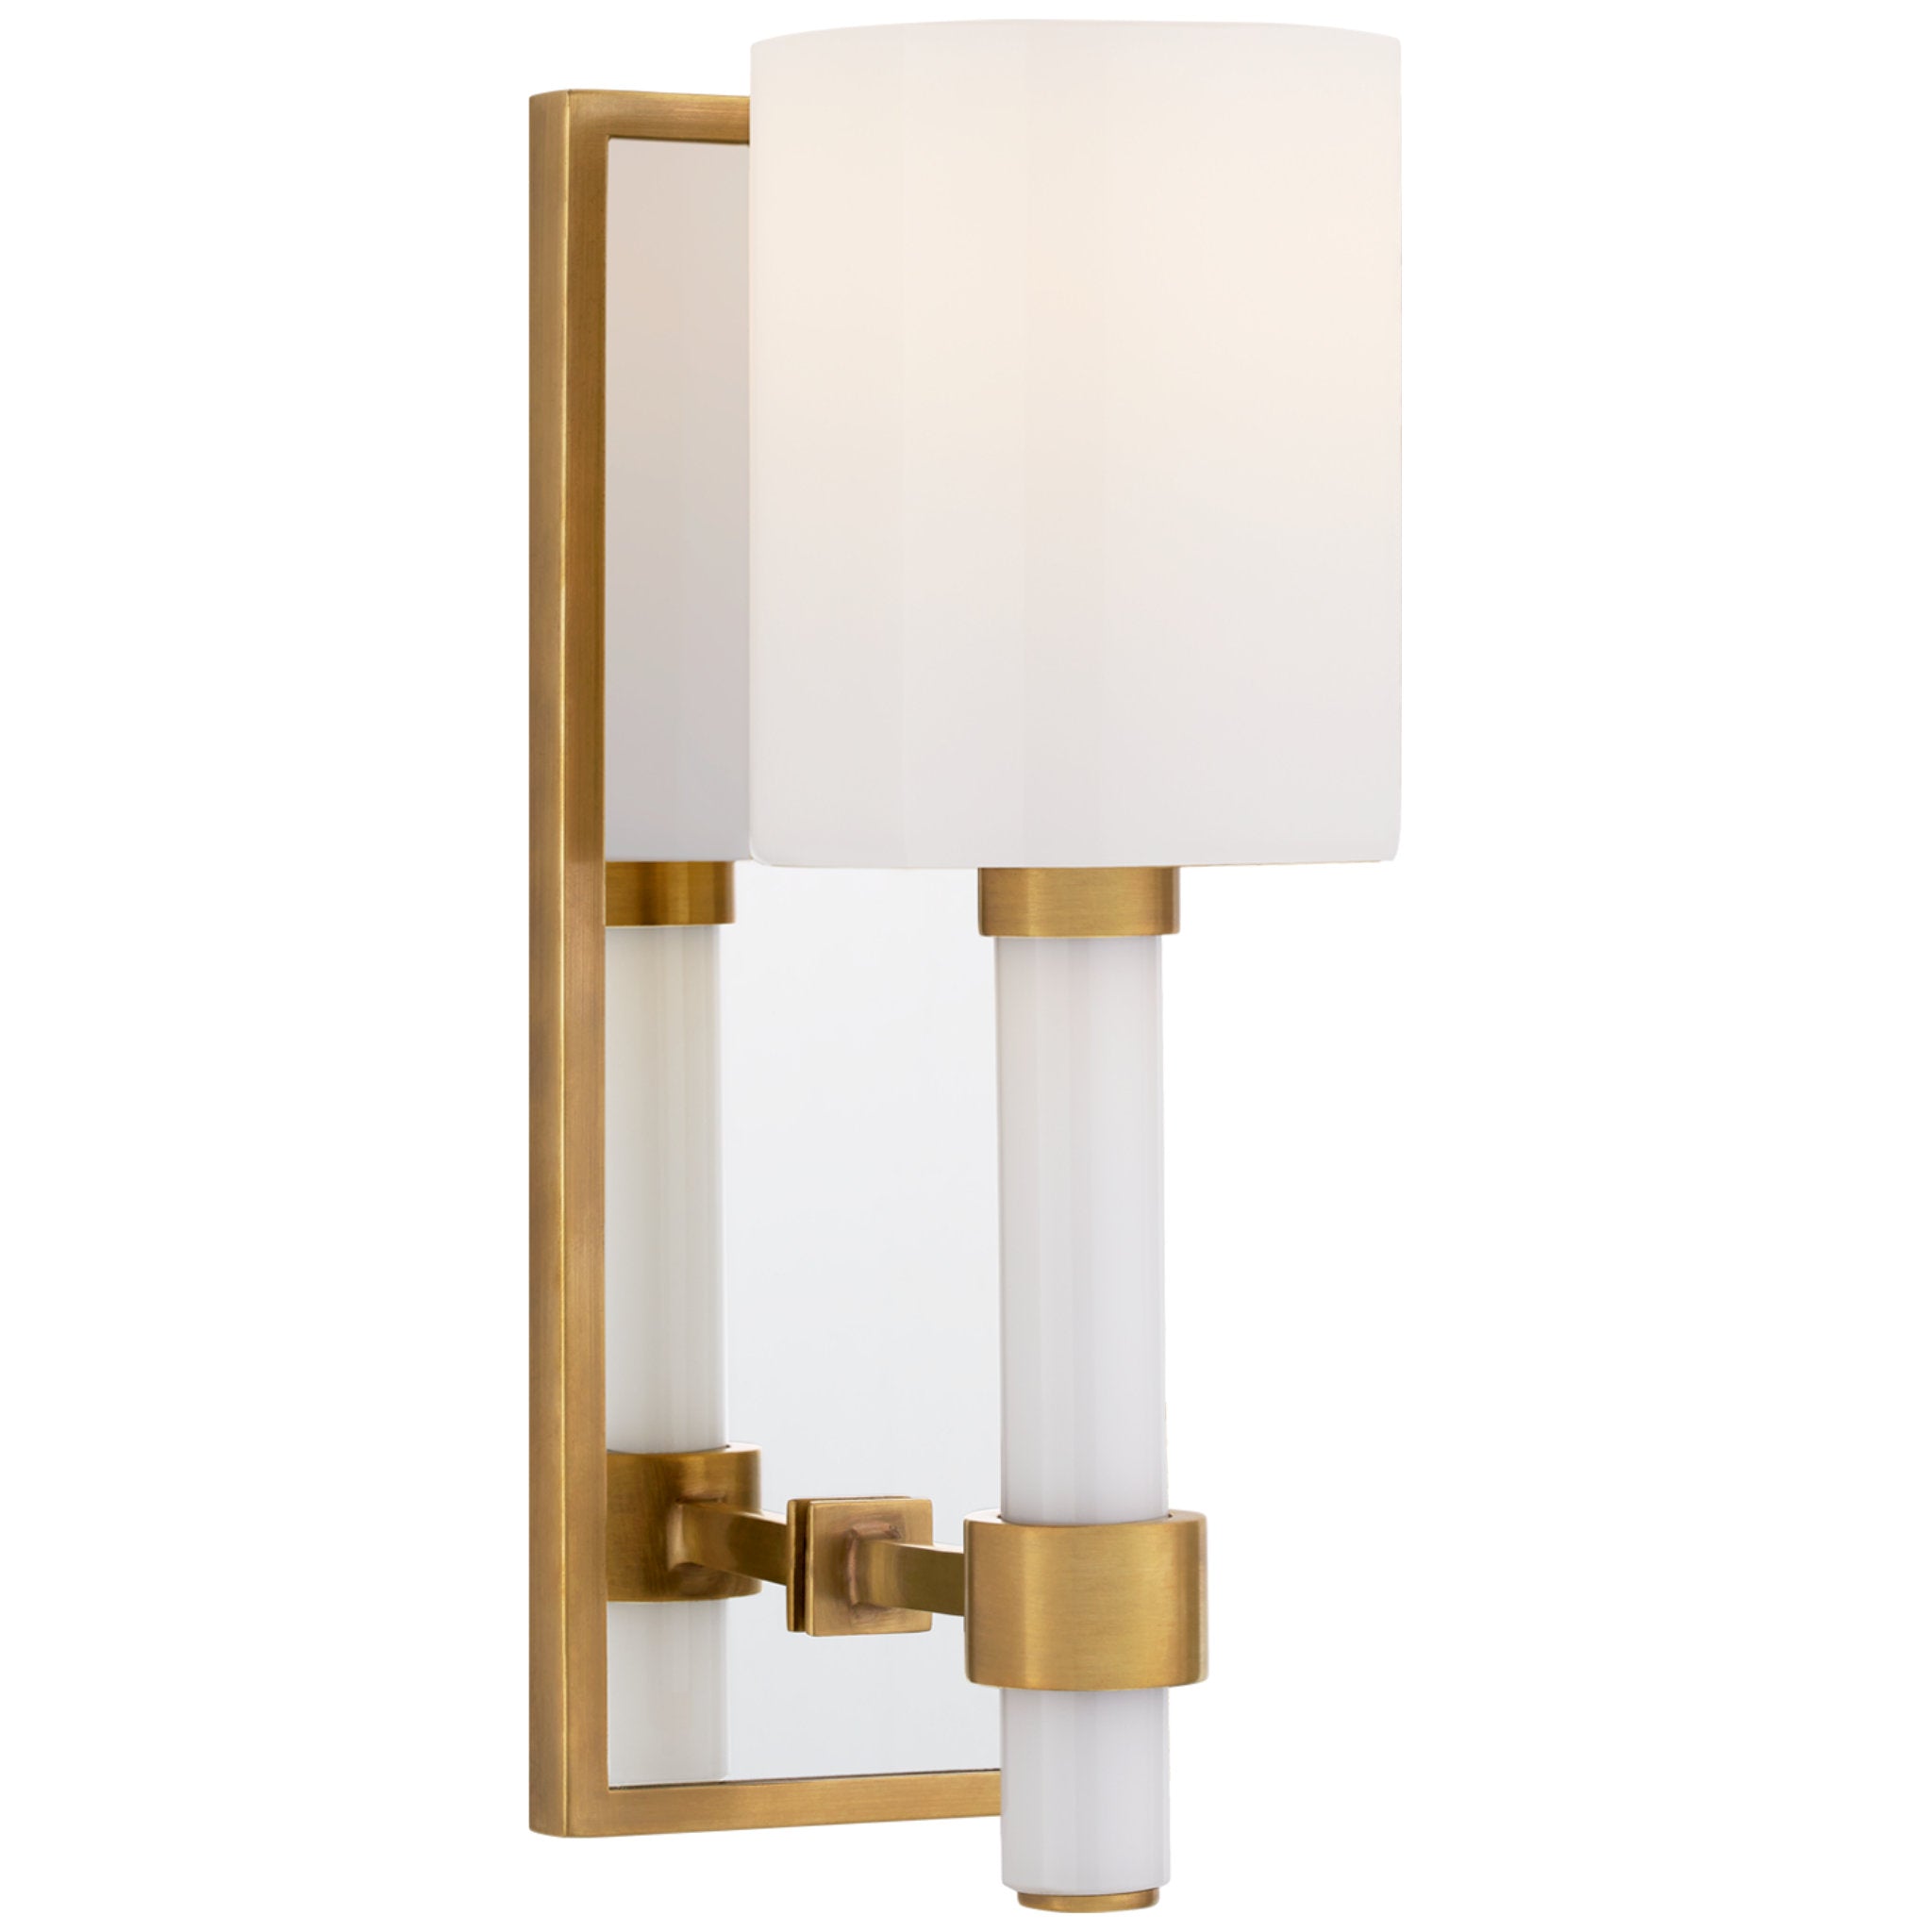 Suzanne Kasler Maribelle Single Sconce in Hand-Rubbed Antique Brass with White Glass